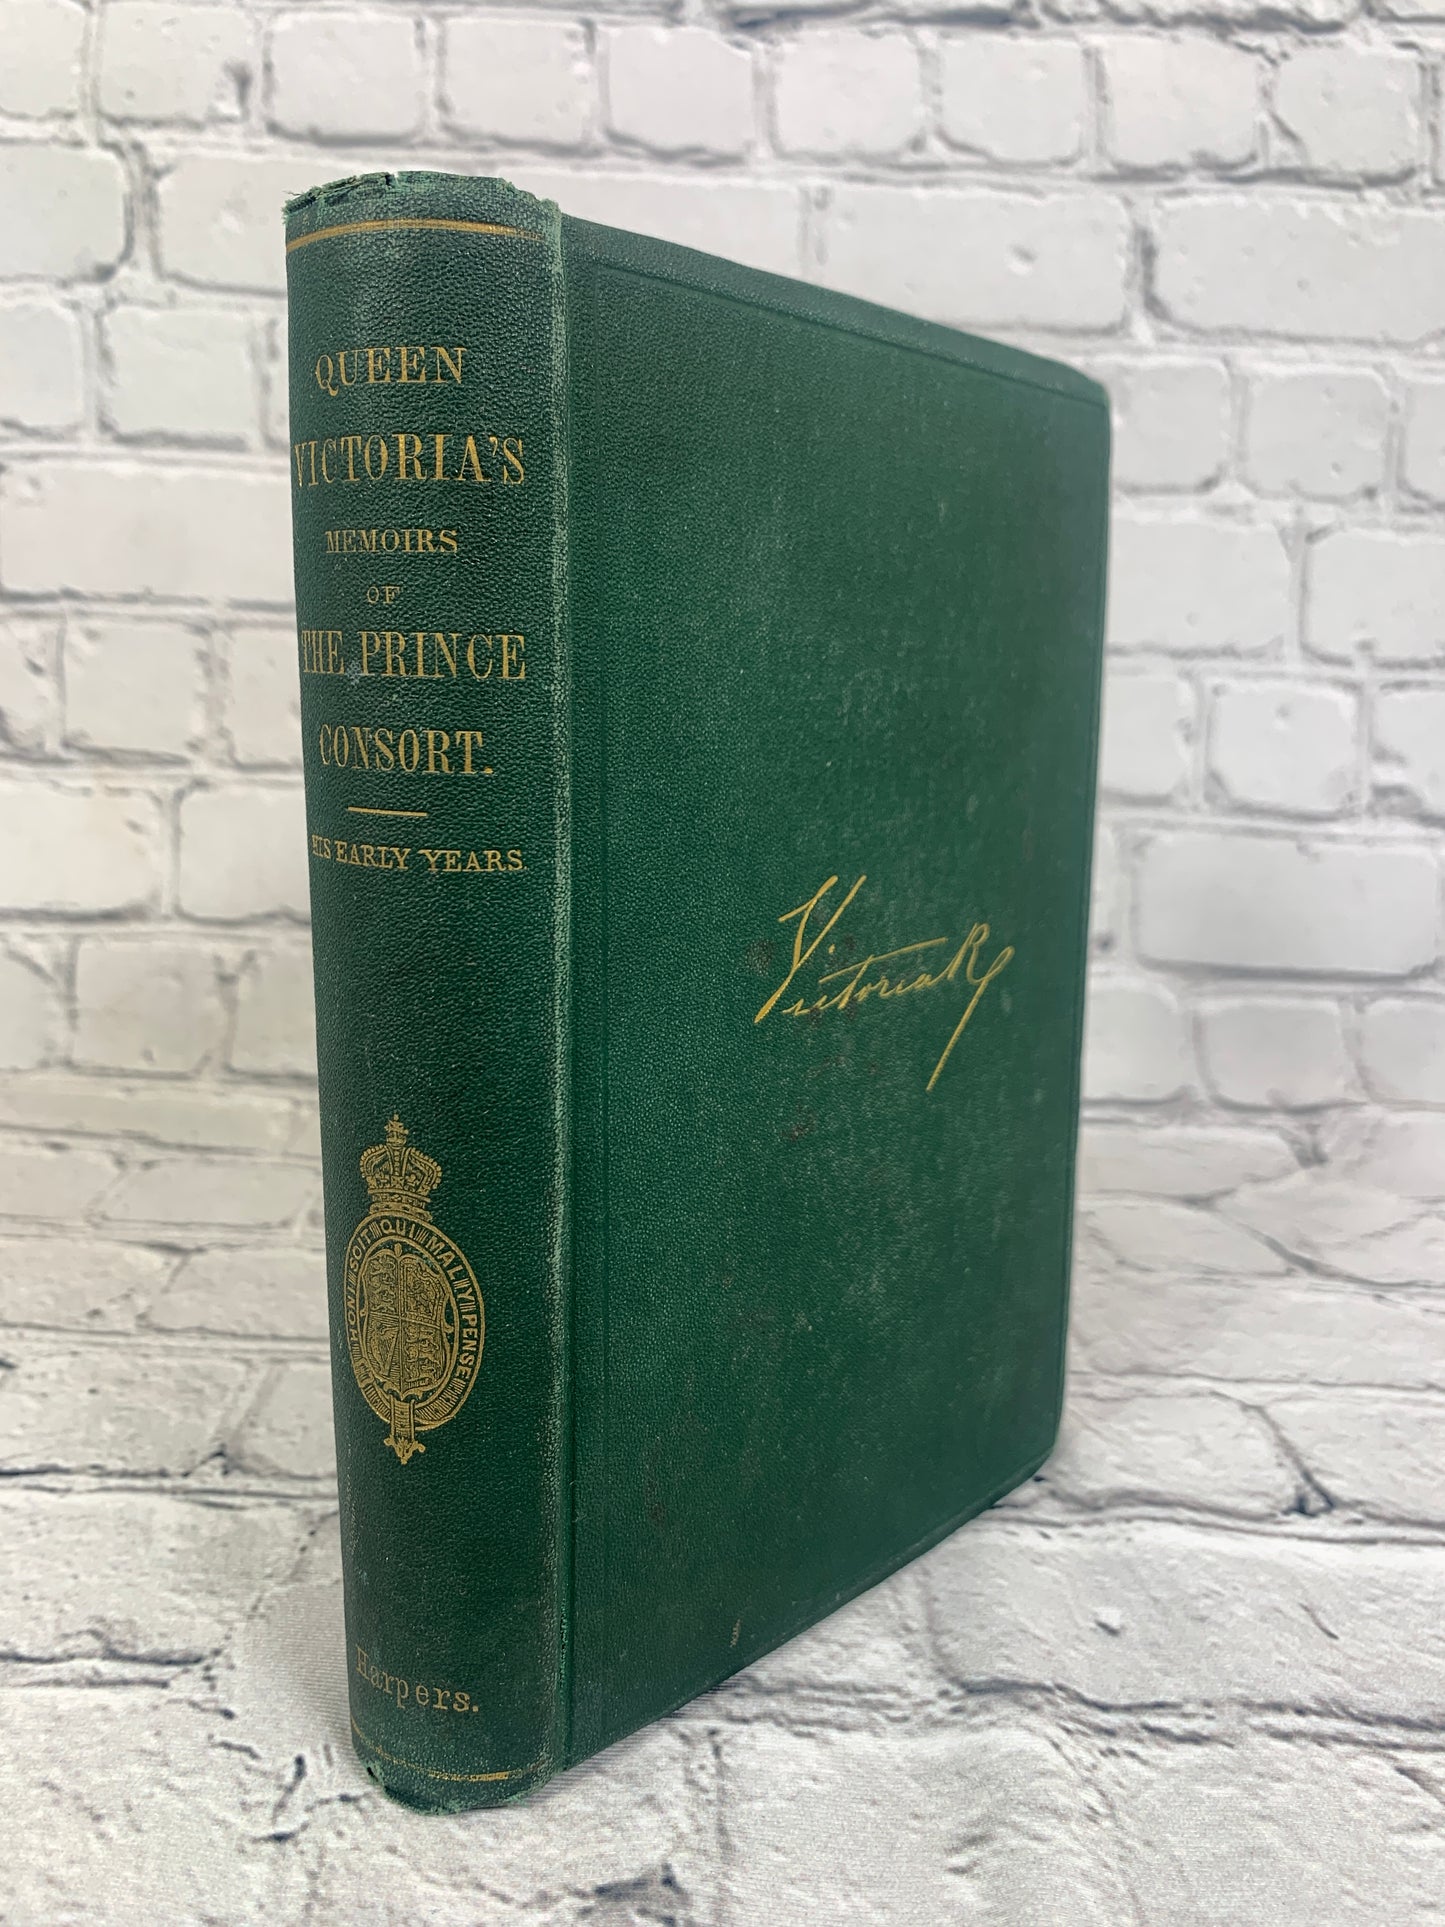 Queen Victoria's Memoirs of the Prince Consort by Lieut. General Grey (1867)